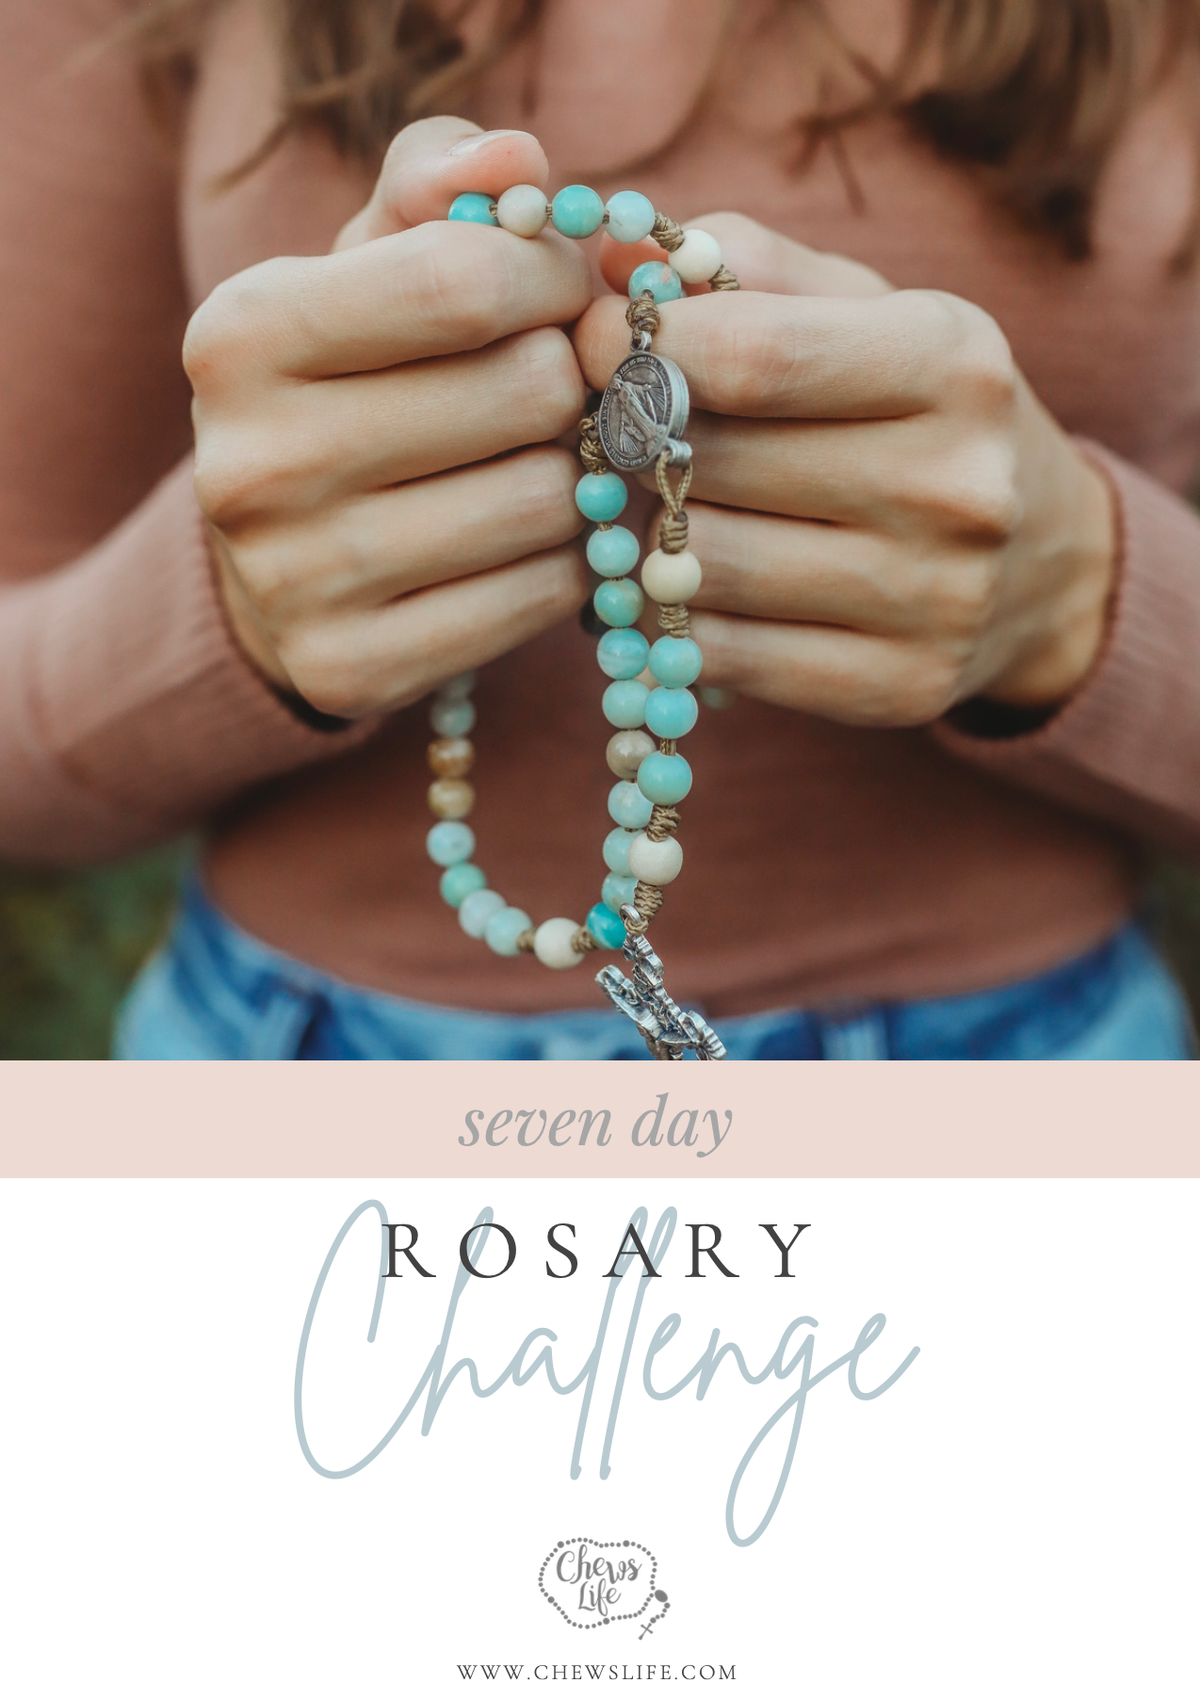 7 Day Rosary Challenge